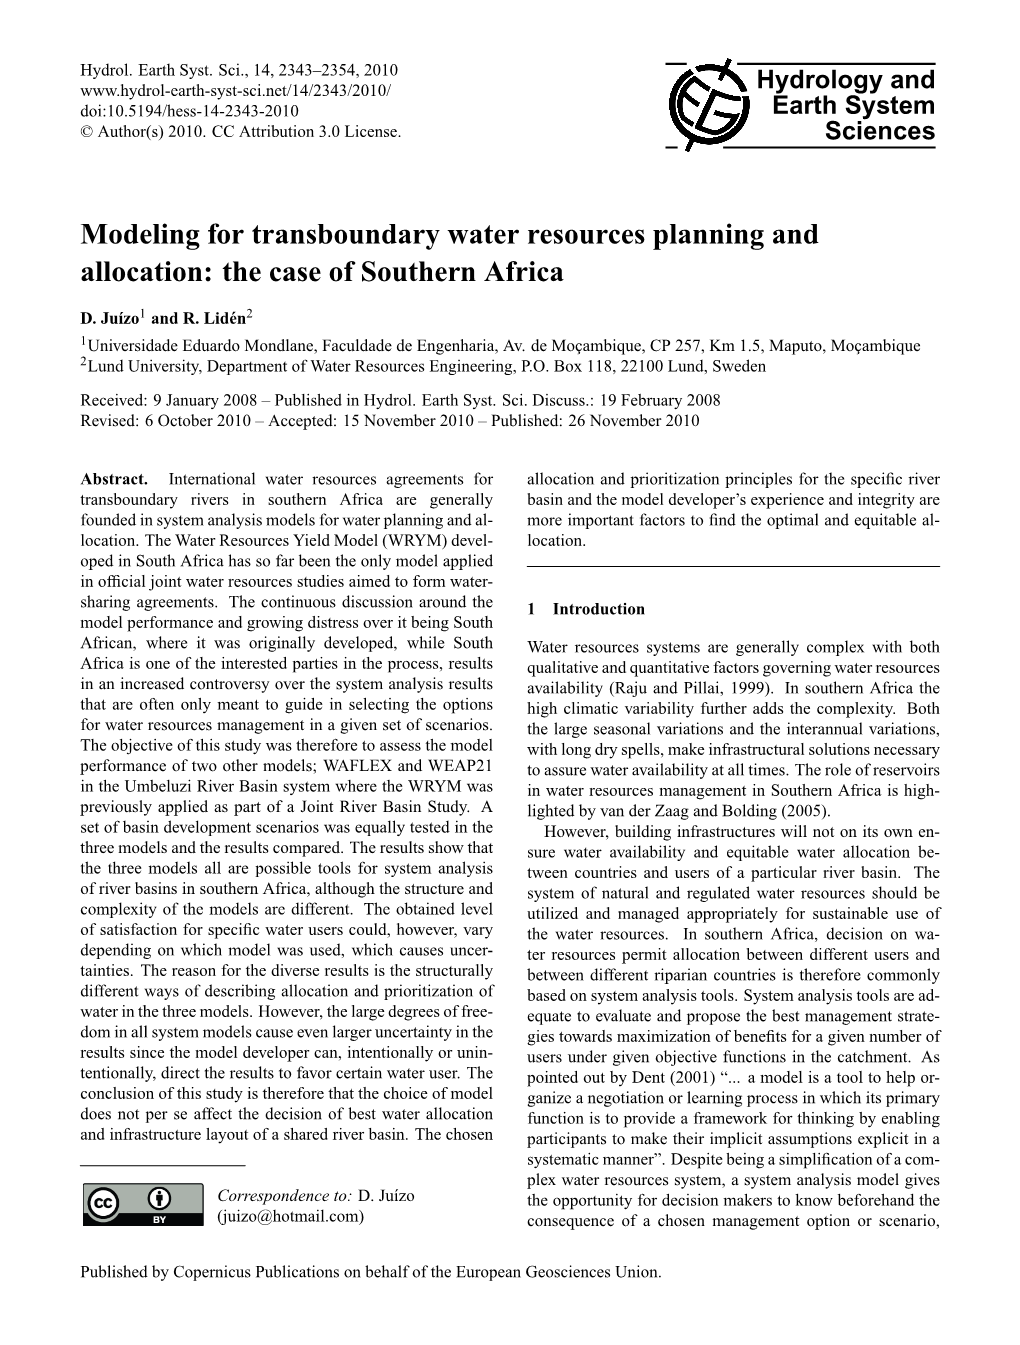 Modeling for Transboundary Water Resources Planning and Allocation: the Case of Southern Africa